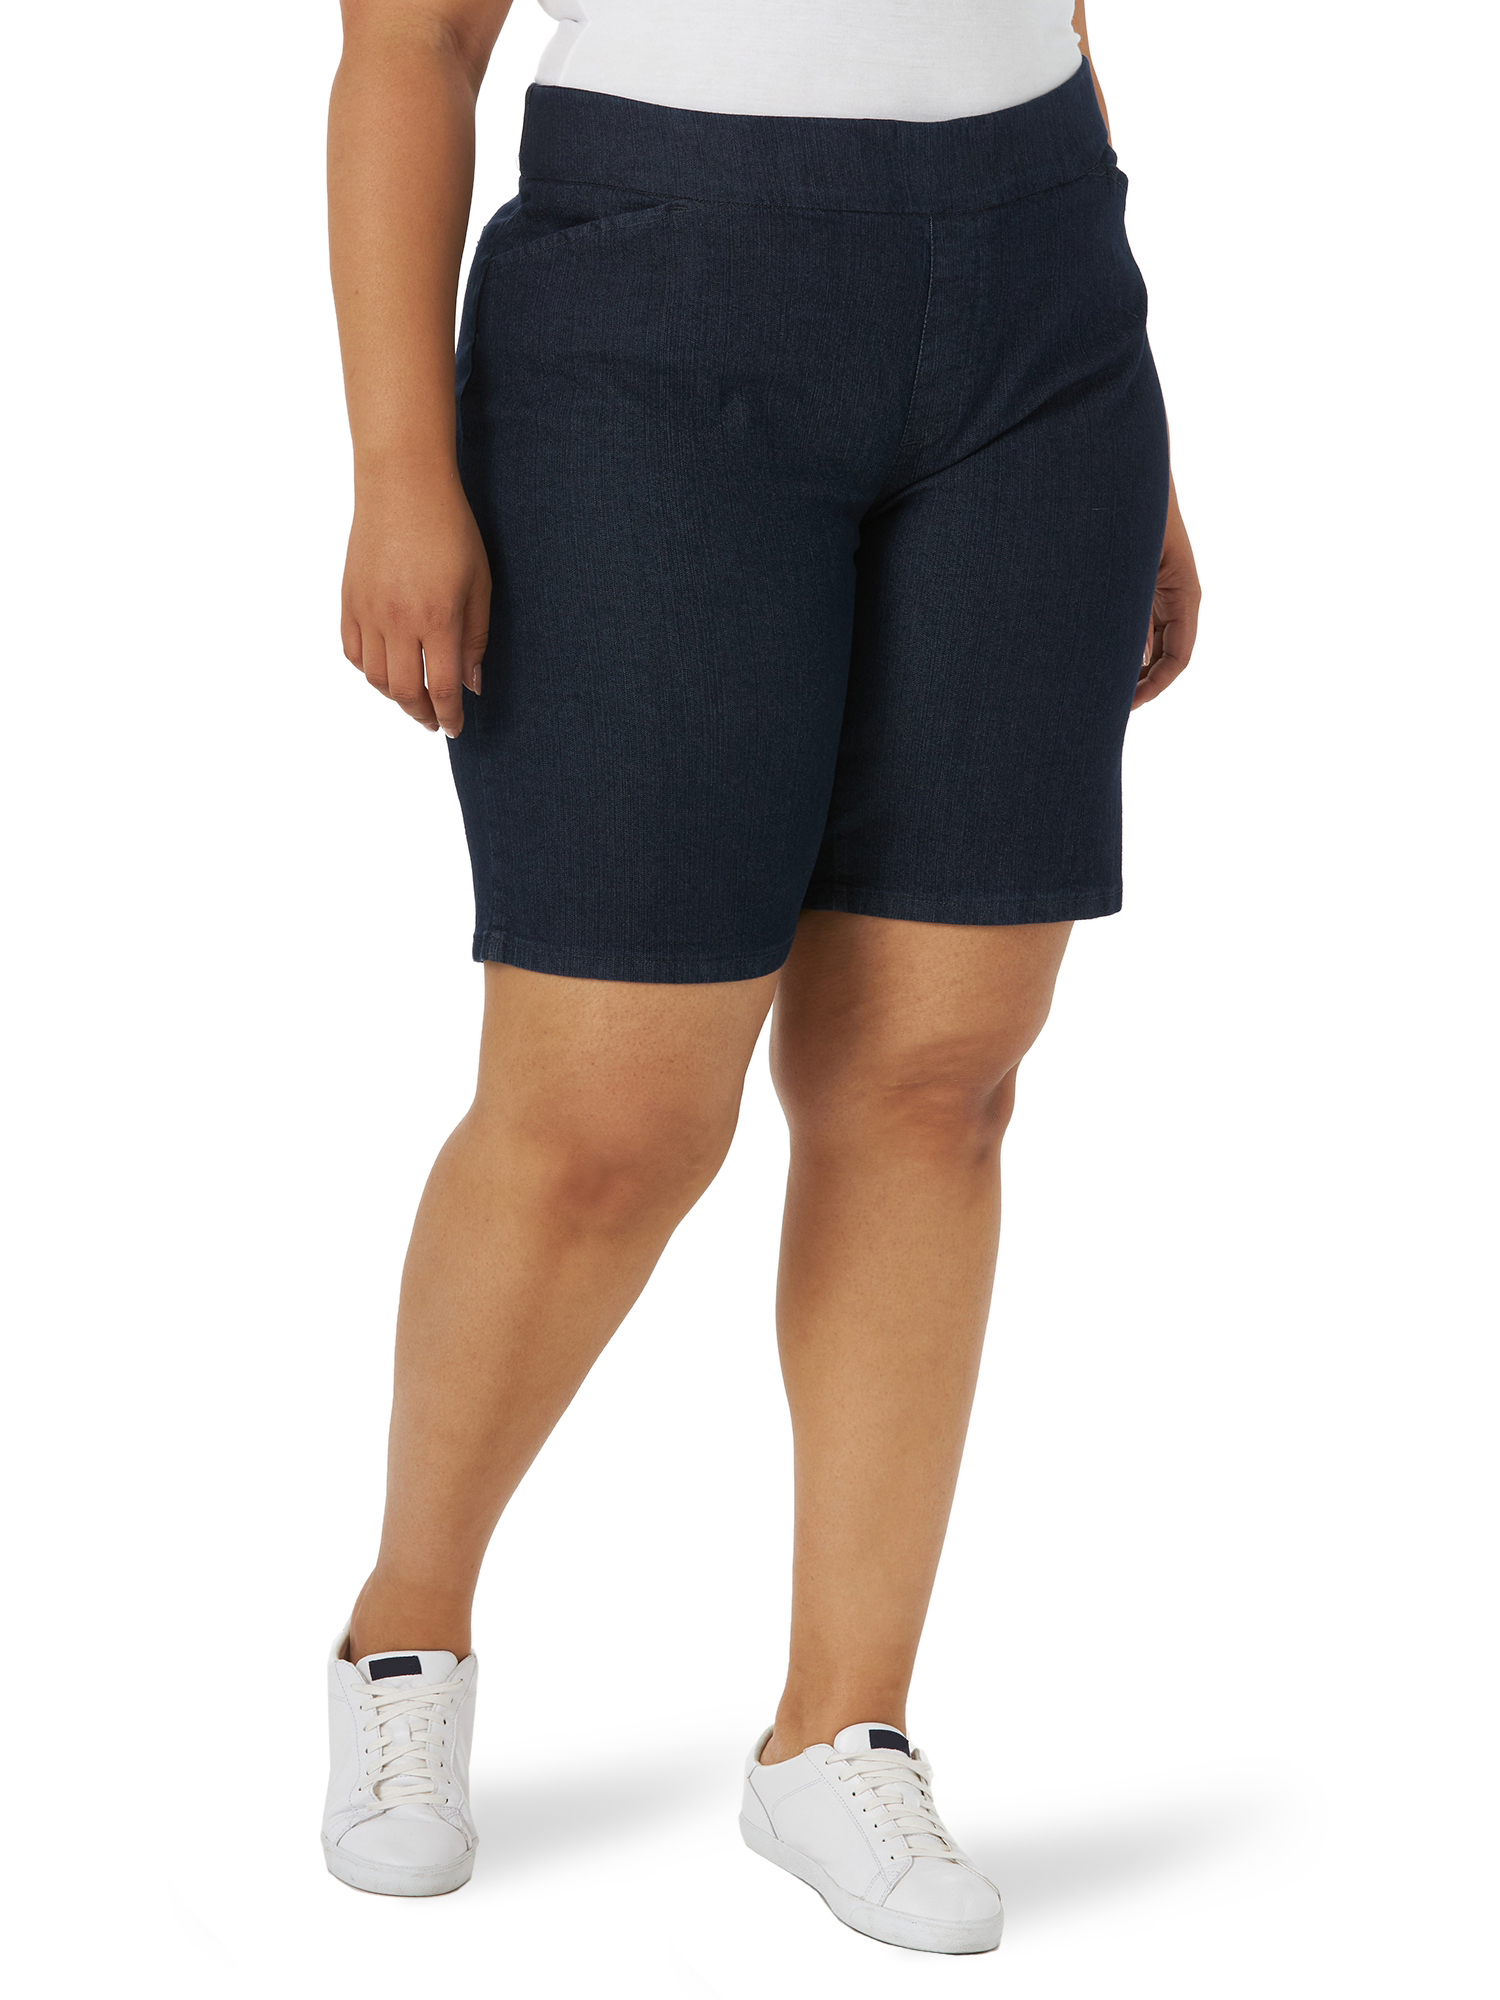 Chic Women's Plus Classic Collection Women's Plus Size Relaxed Fit Flat Bermuda Short - image 1 of 5